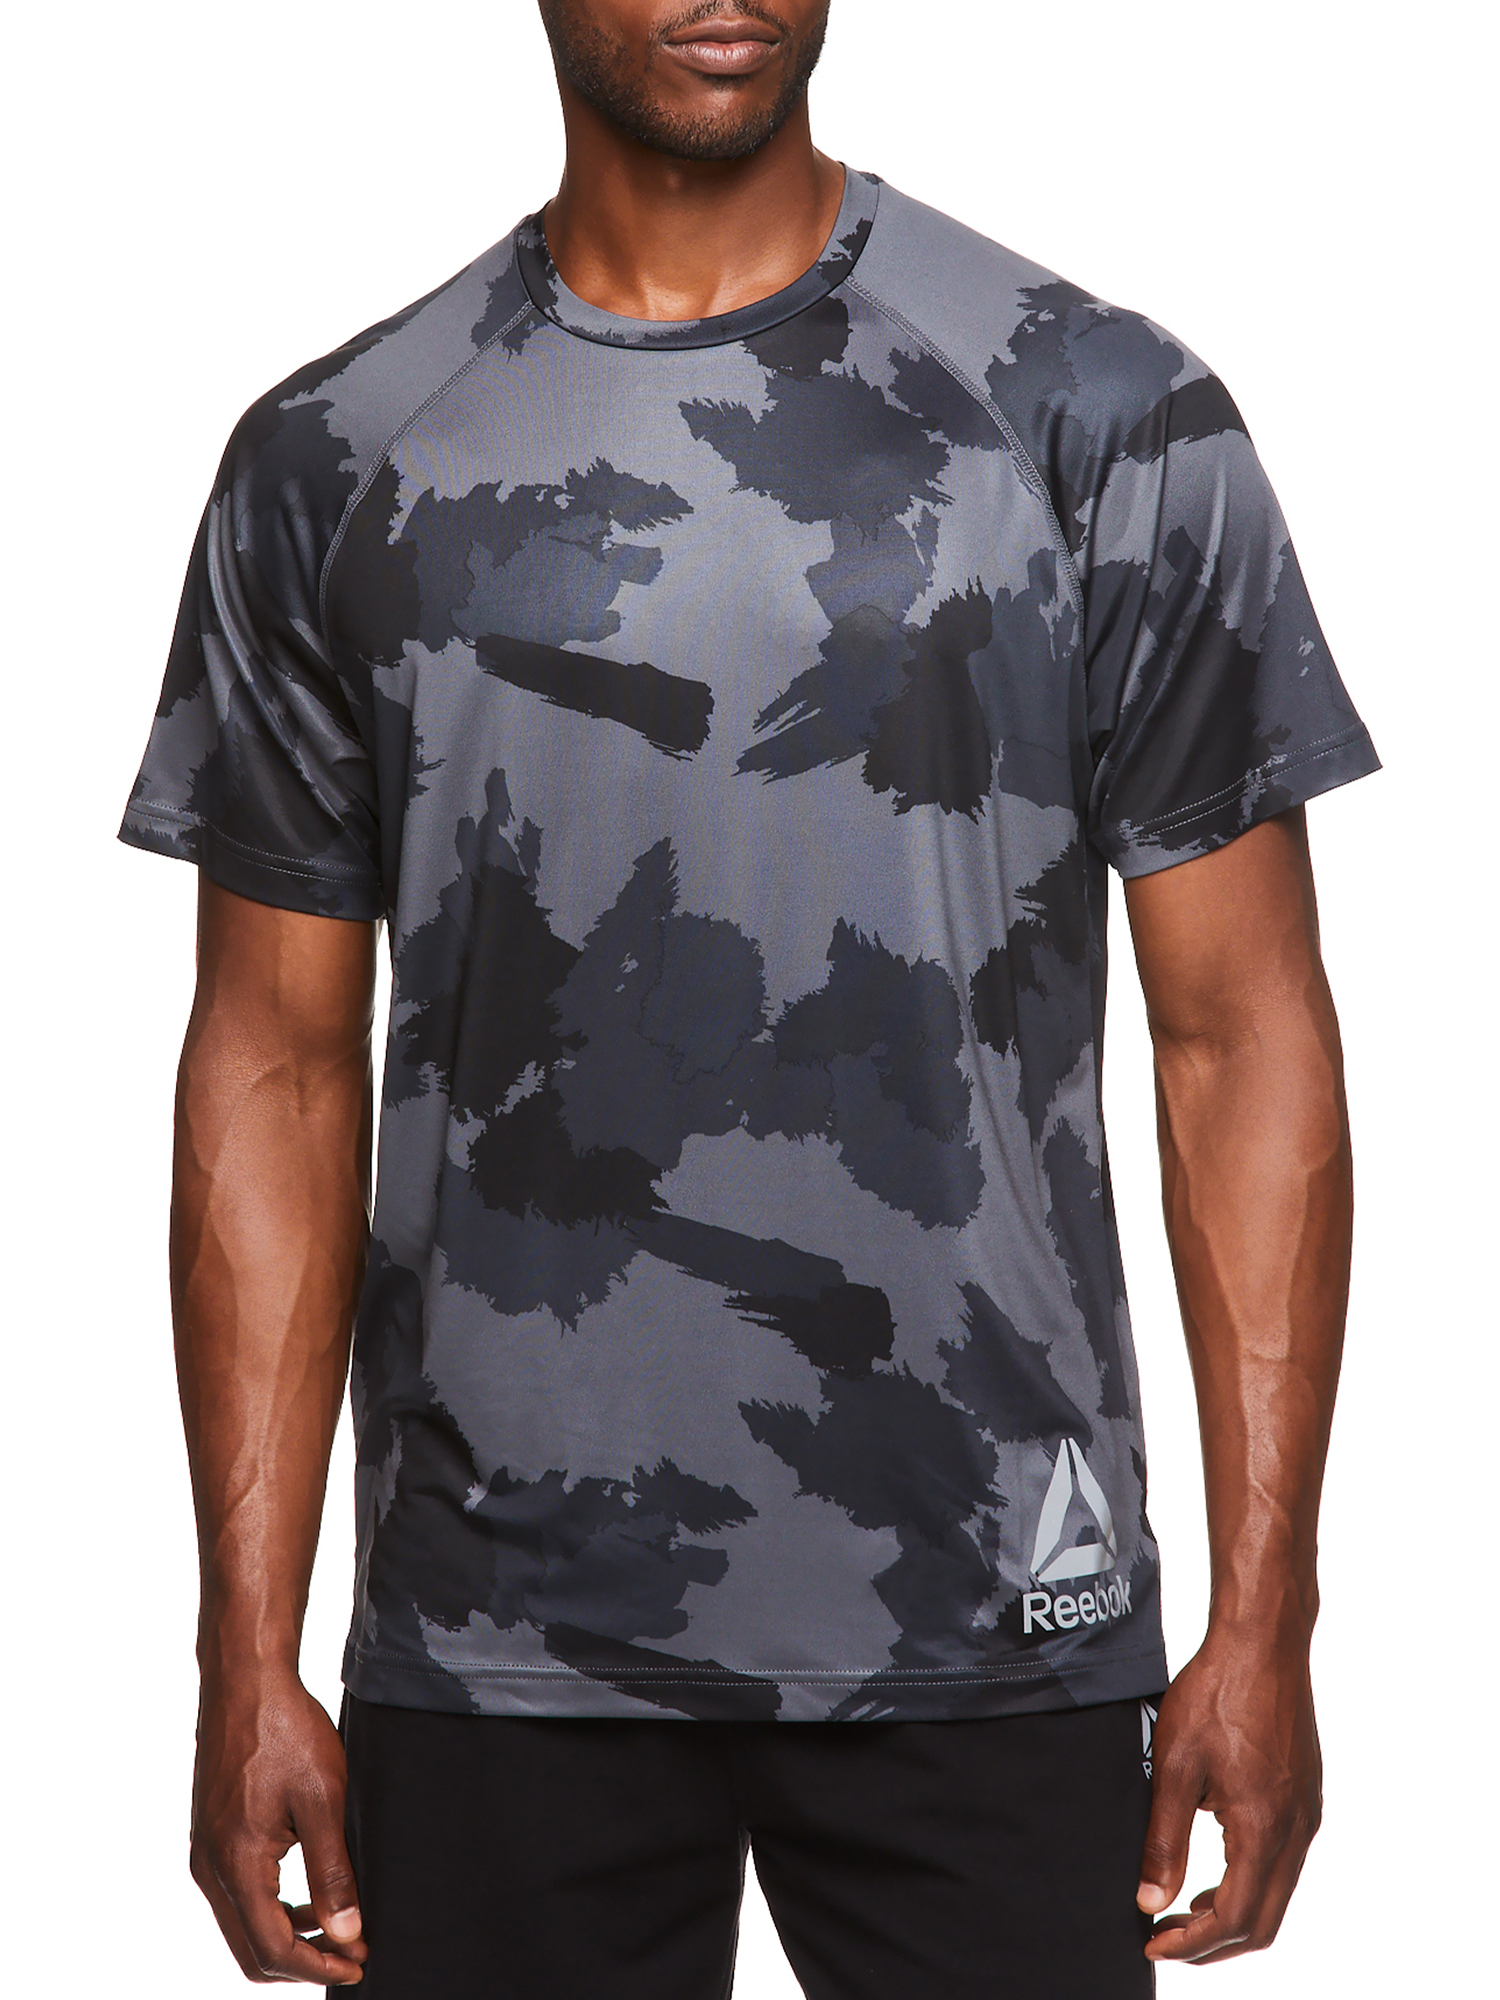 Reebok Men's and Big Men's Active Short Sleeve Duration Performance Tee, up to Size 3XL - image 1 of 4